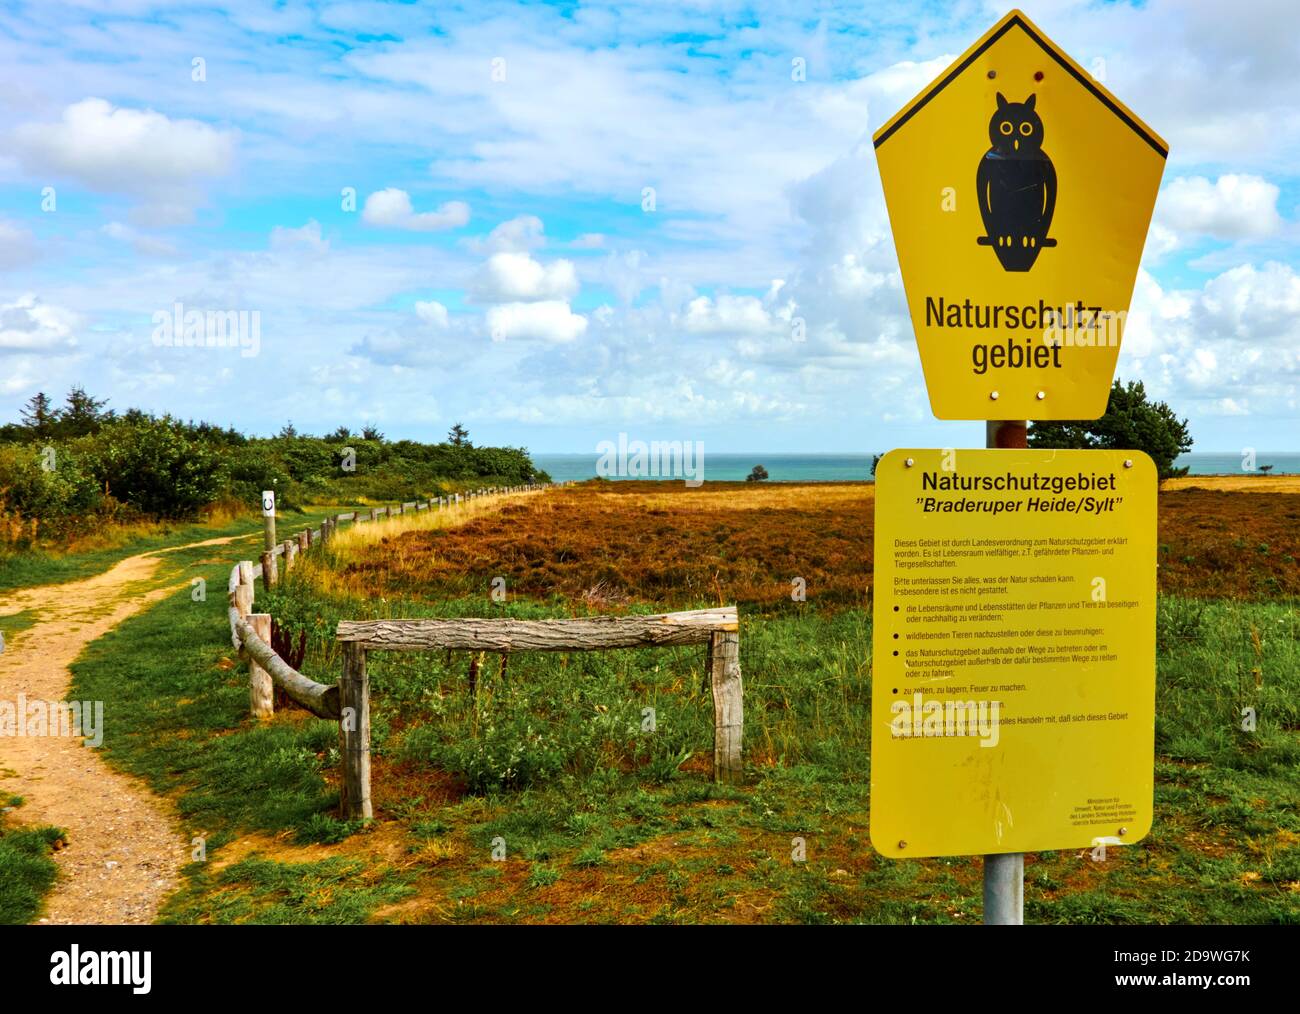 Sylt, Germany, September 4., 2020: Entrance to the Braderuper Heide nature reserve, a large heath area on the island of Sylt, Germany Stock Photo